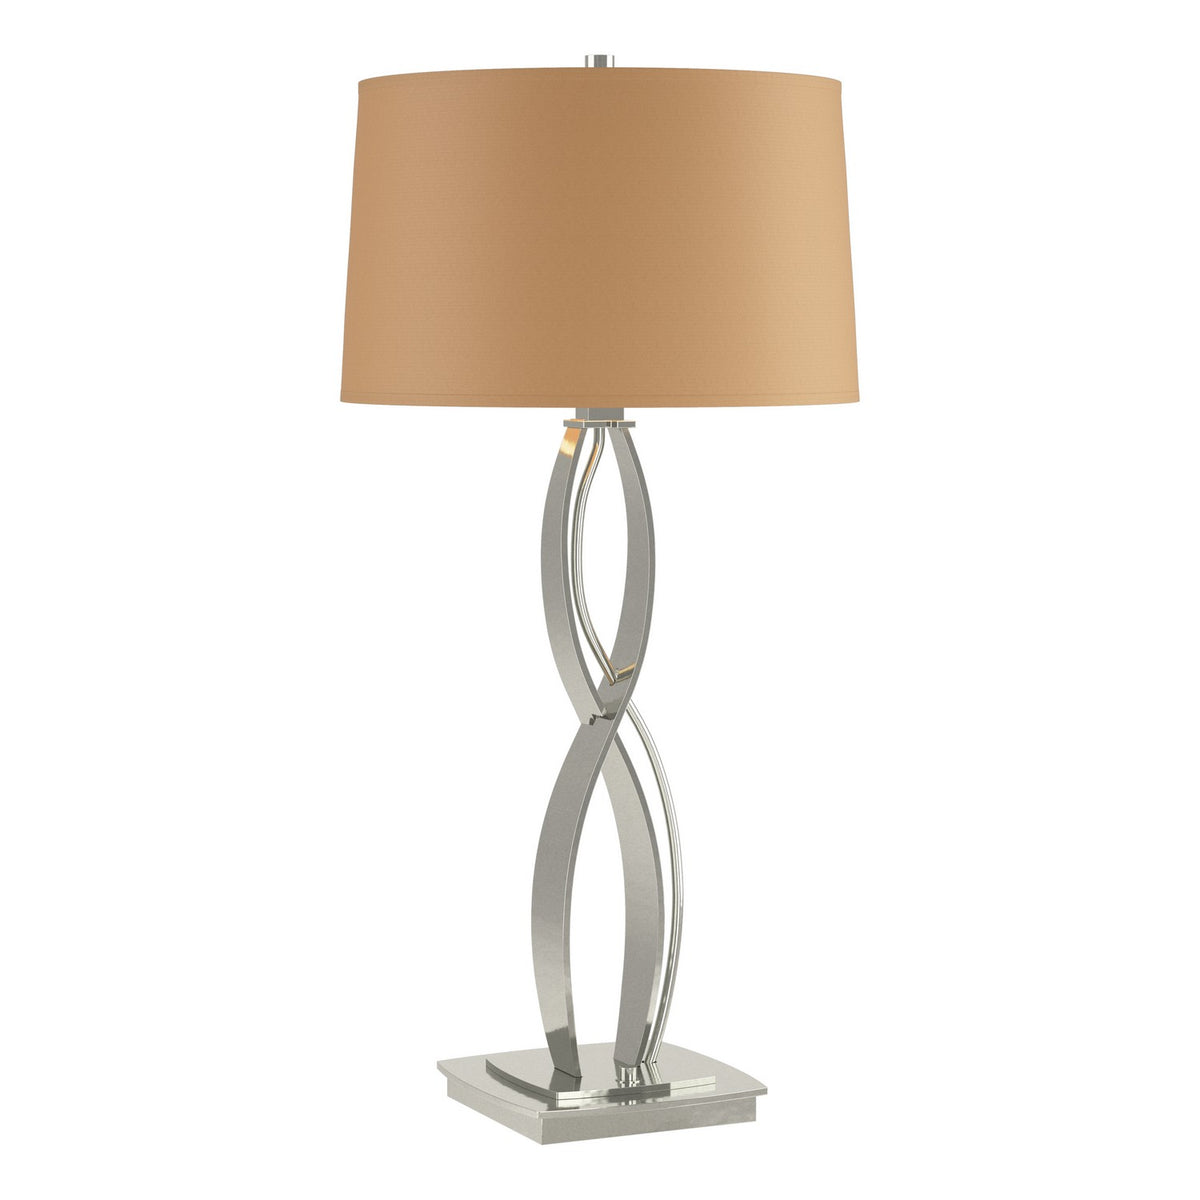 Hubbardton Forge - 272687-SKT-85-SB1594 - One Light Table Lamp - Almost Infinity - Sterling